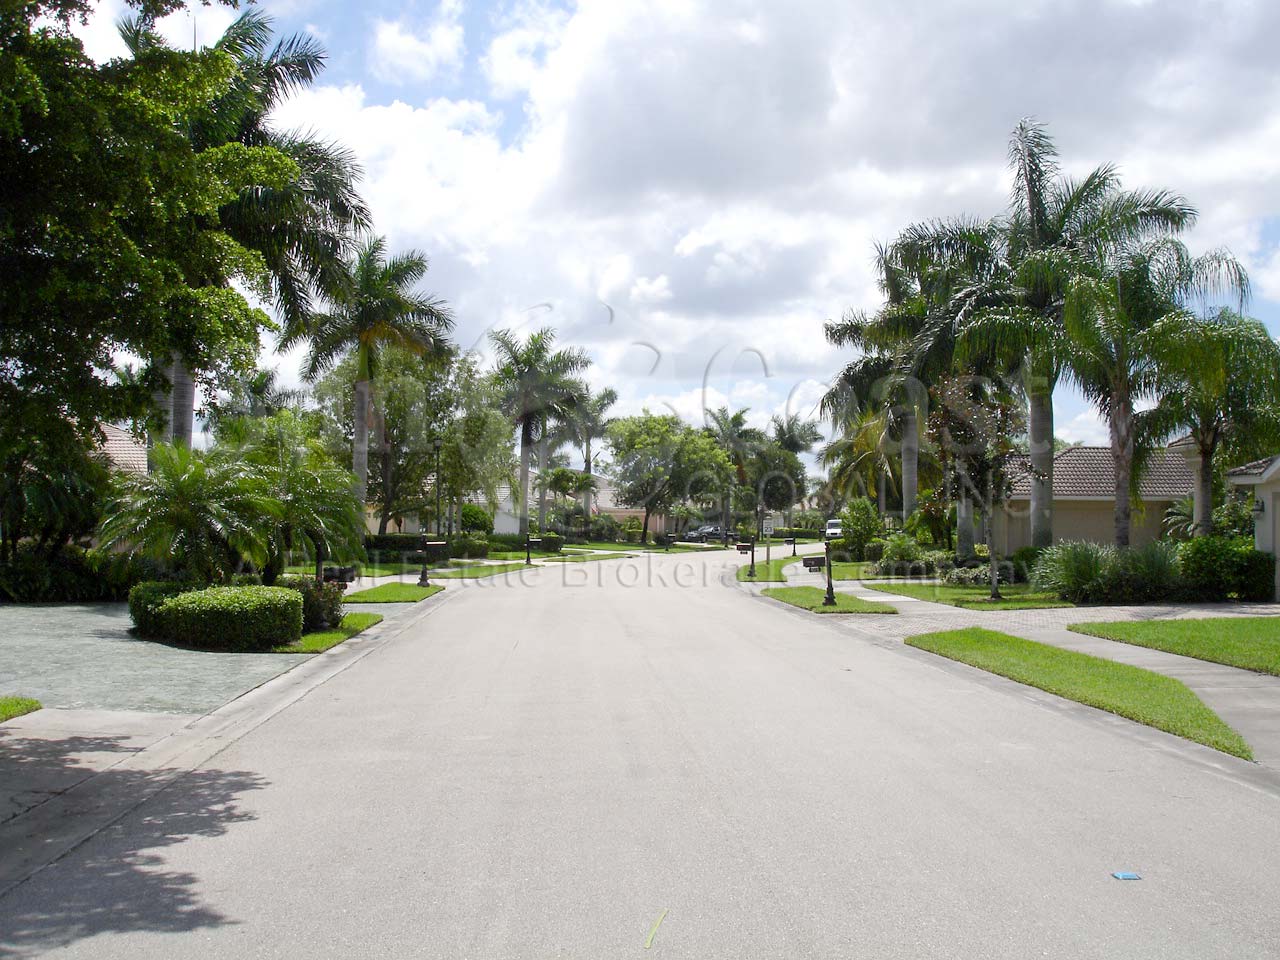 Cedar Hammock Estates consists of single family homes with tile roofs